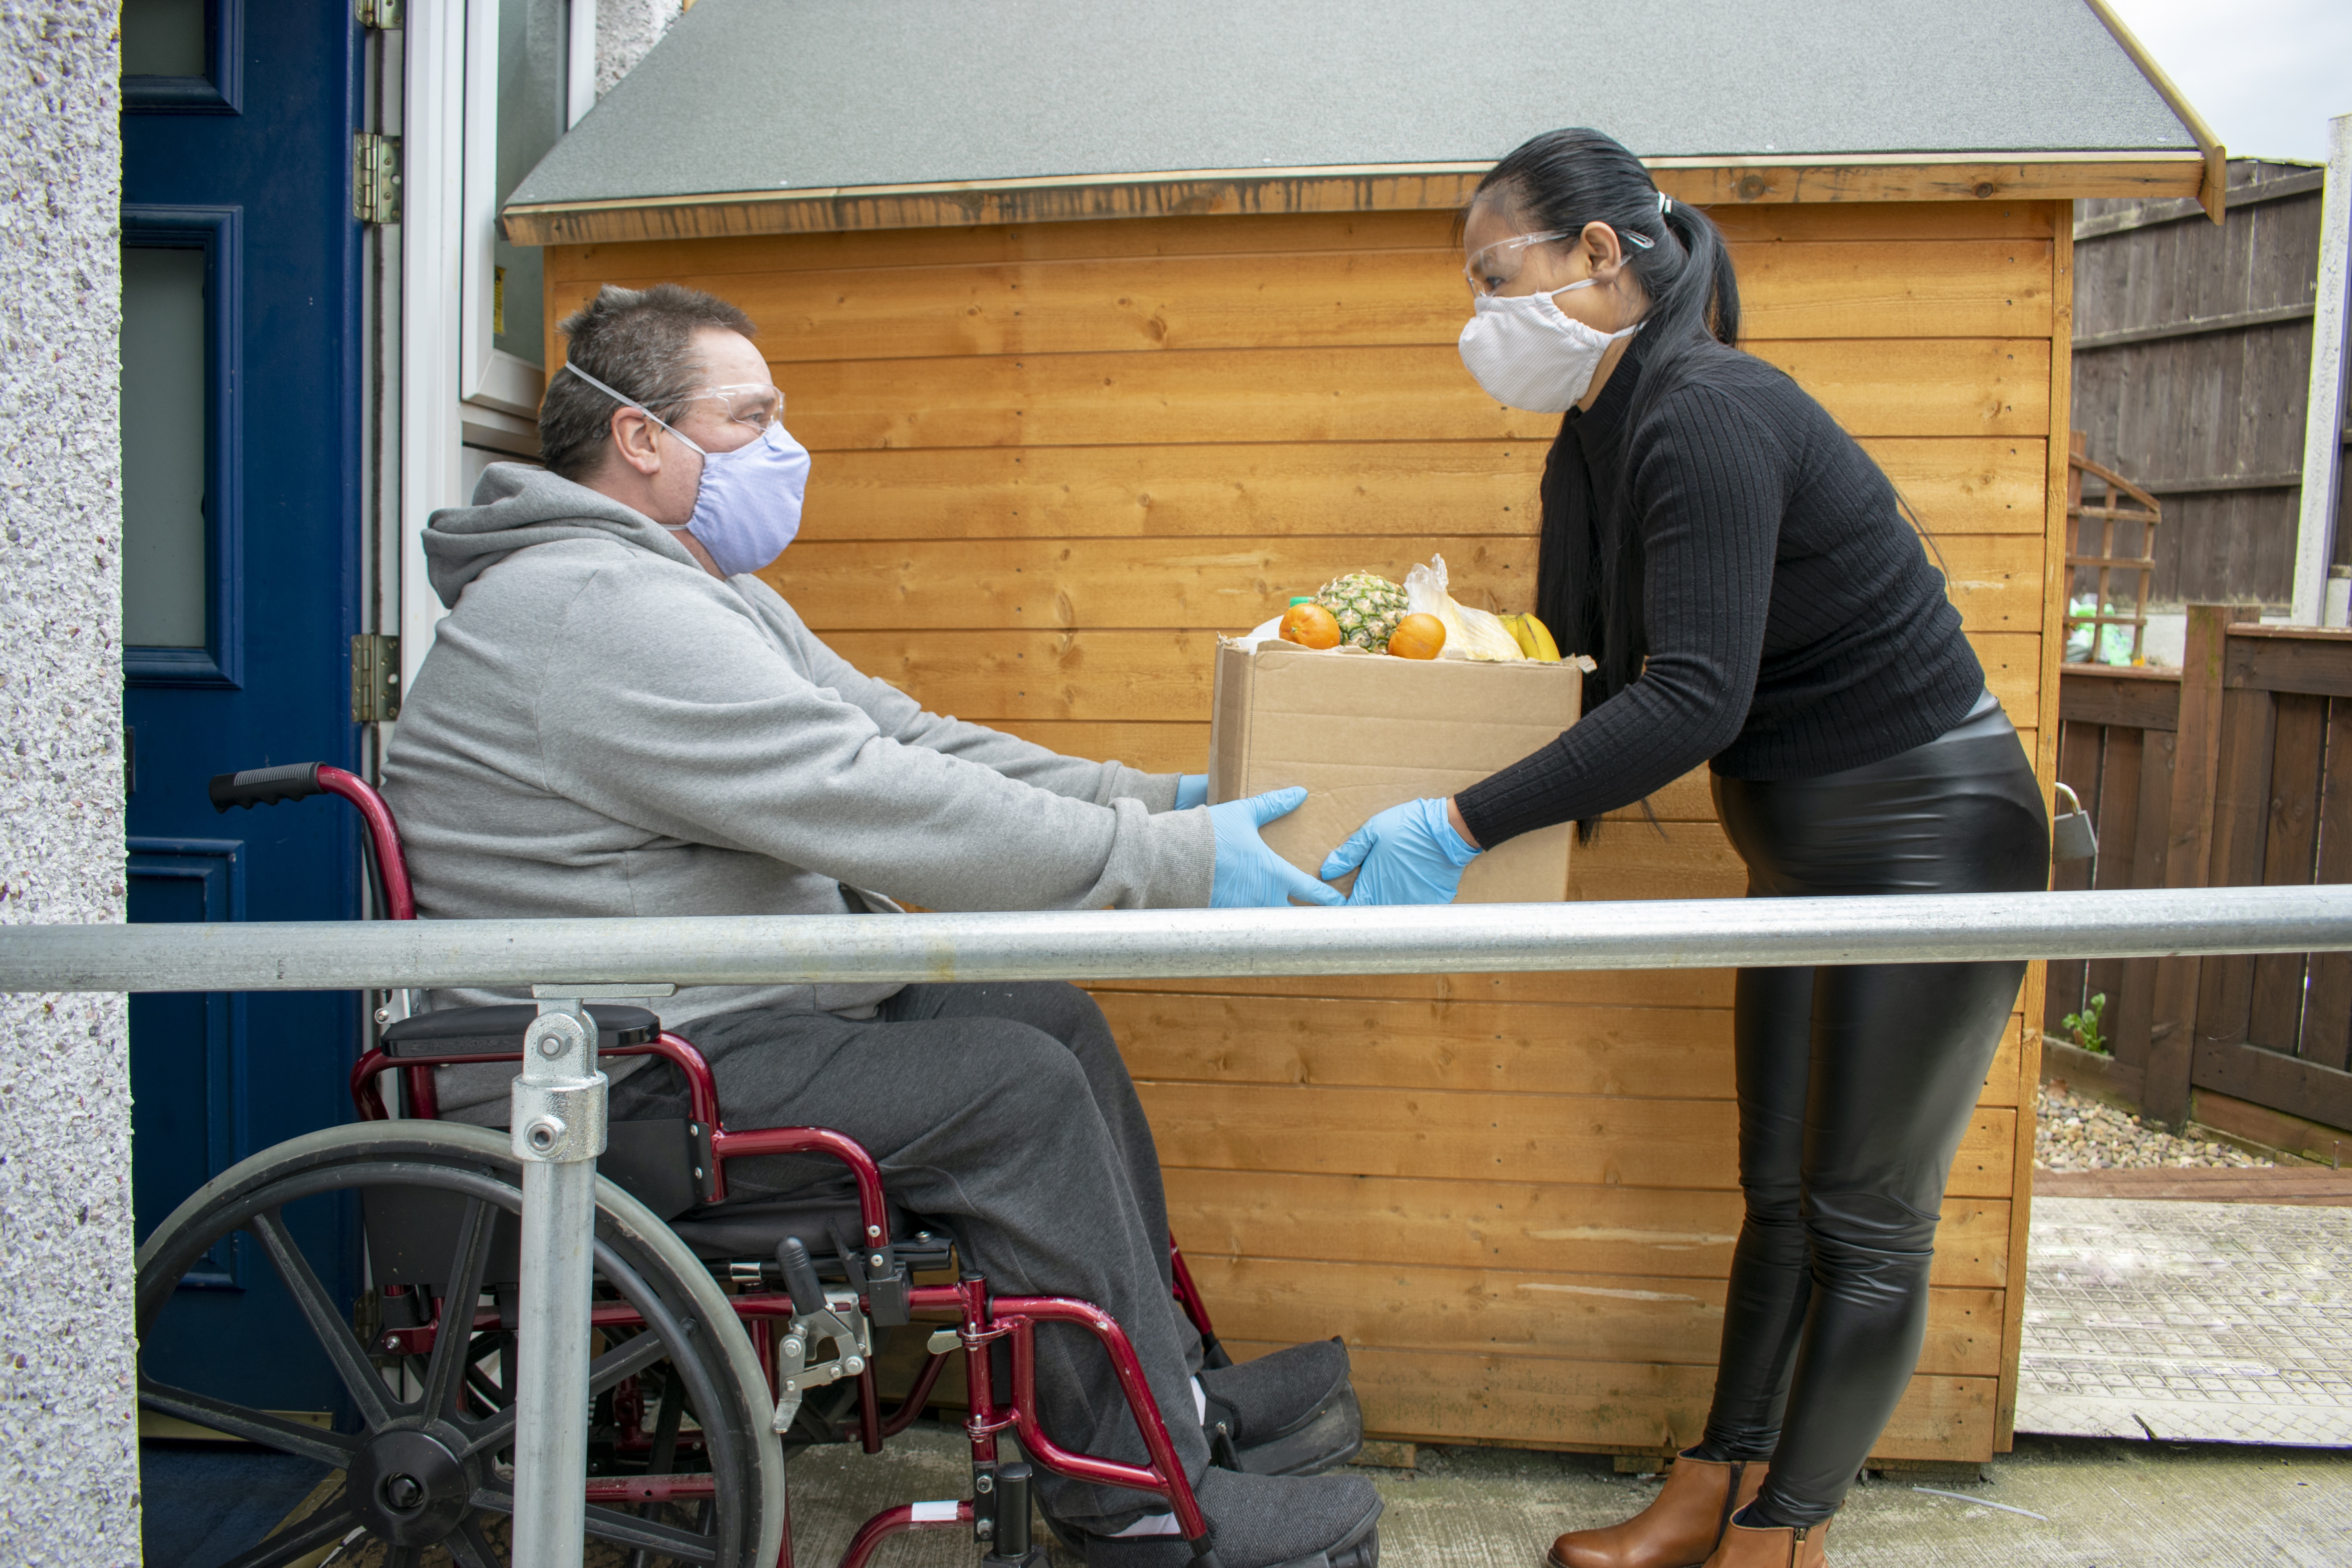 Addressing Food Insecurity for Those Living with Disabilities